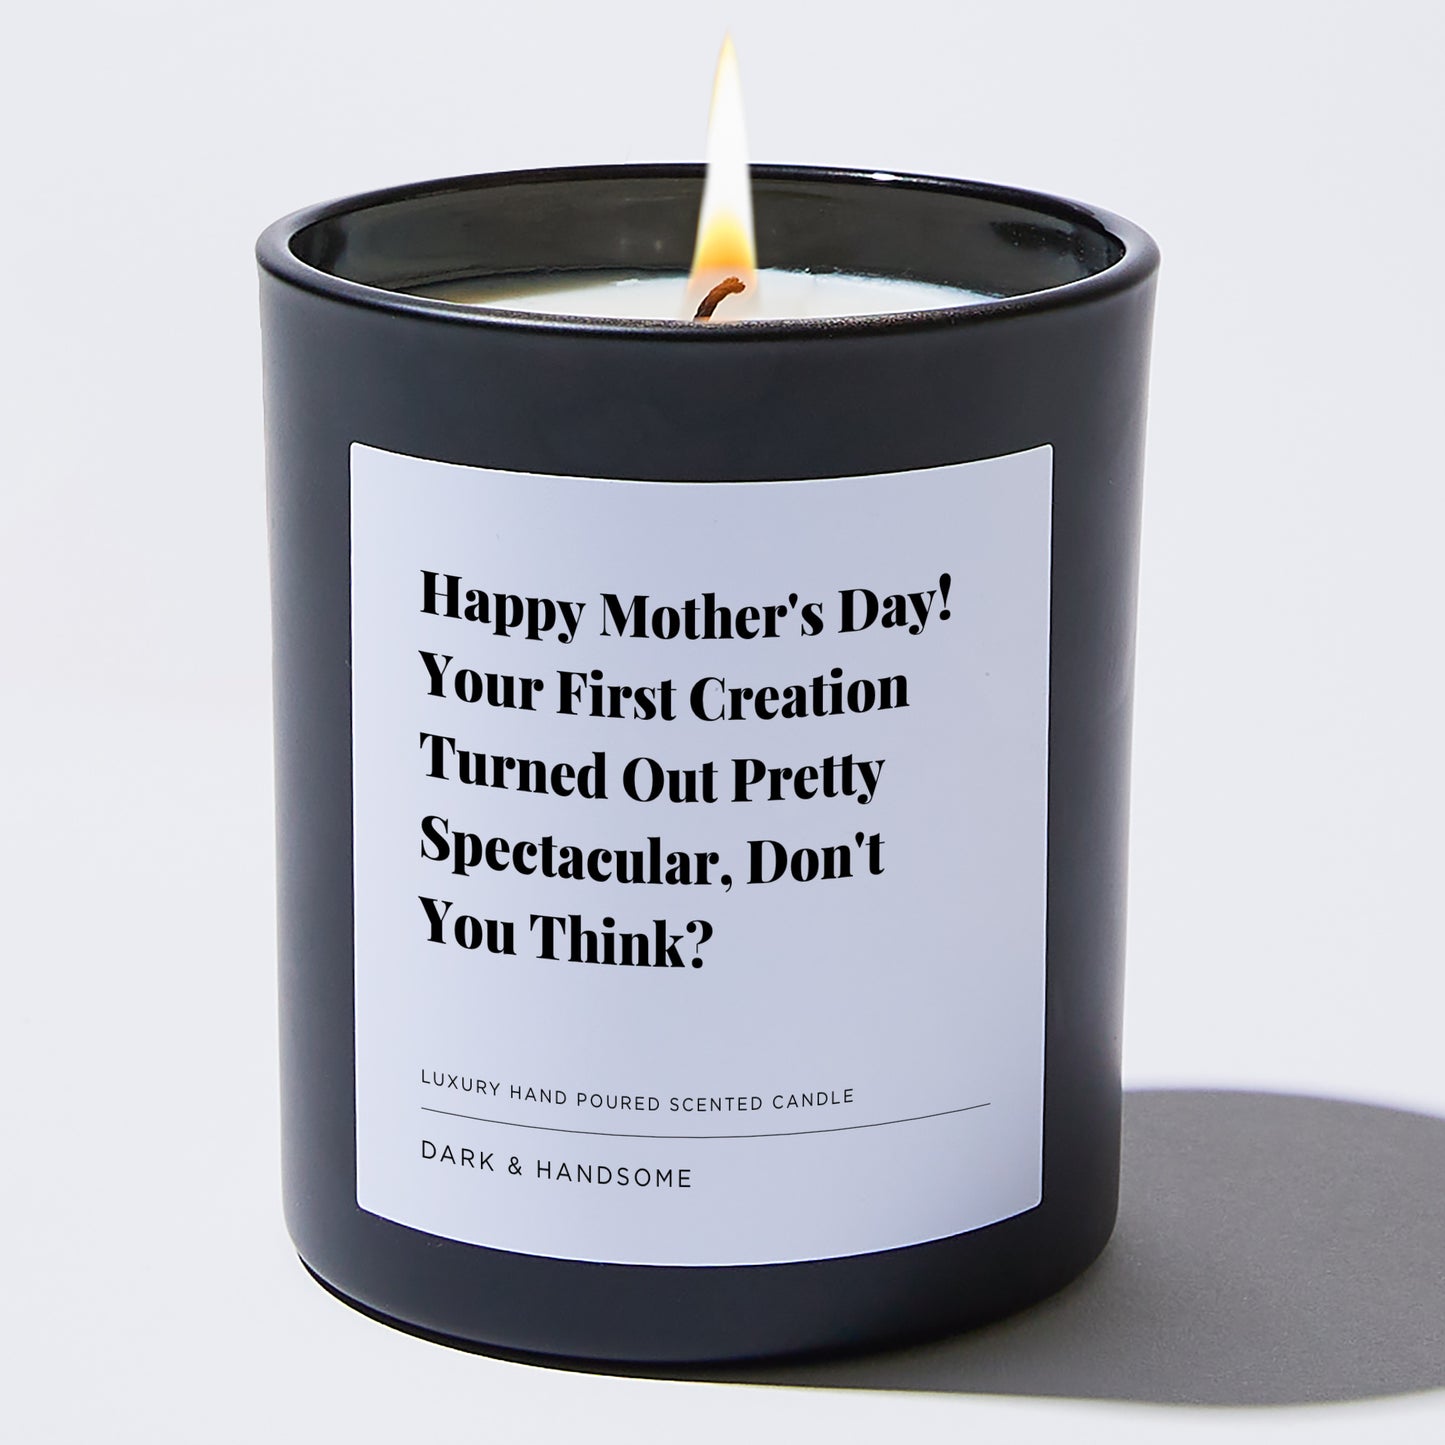 Gift for Mom - Happy Mother's Day! Your First Creation Turned Out Pretty Spectacular, Don't You Think? - Candle